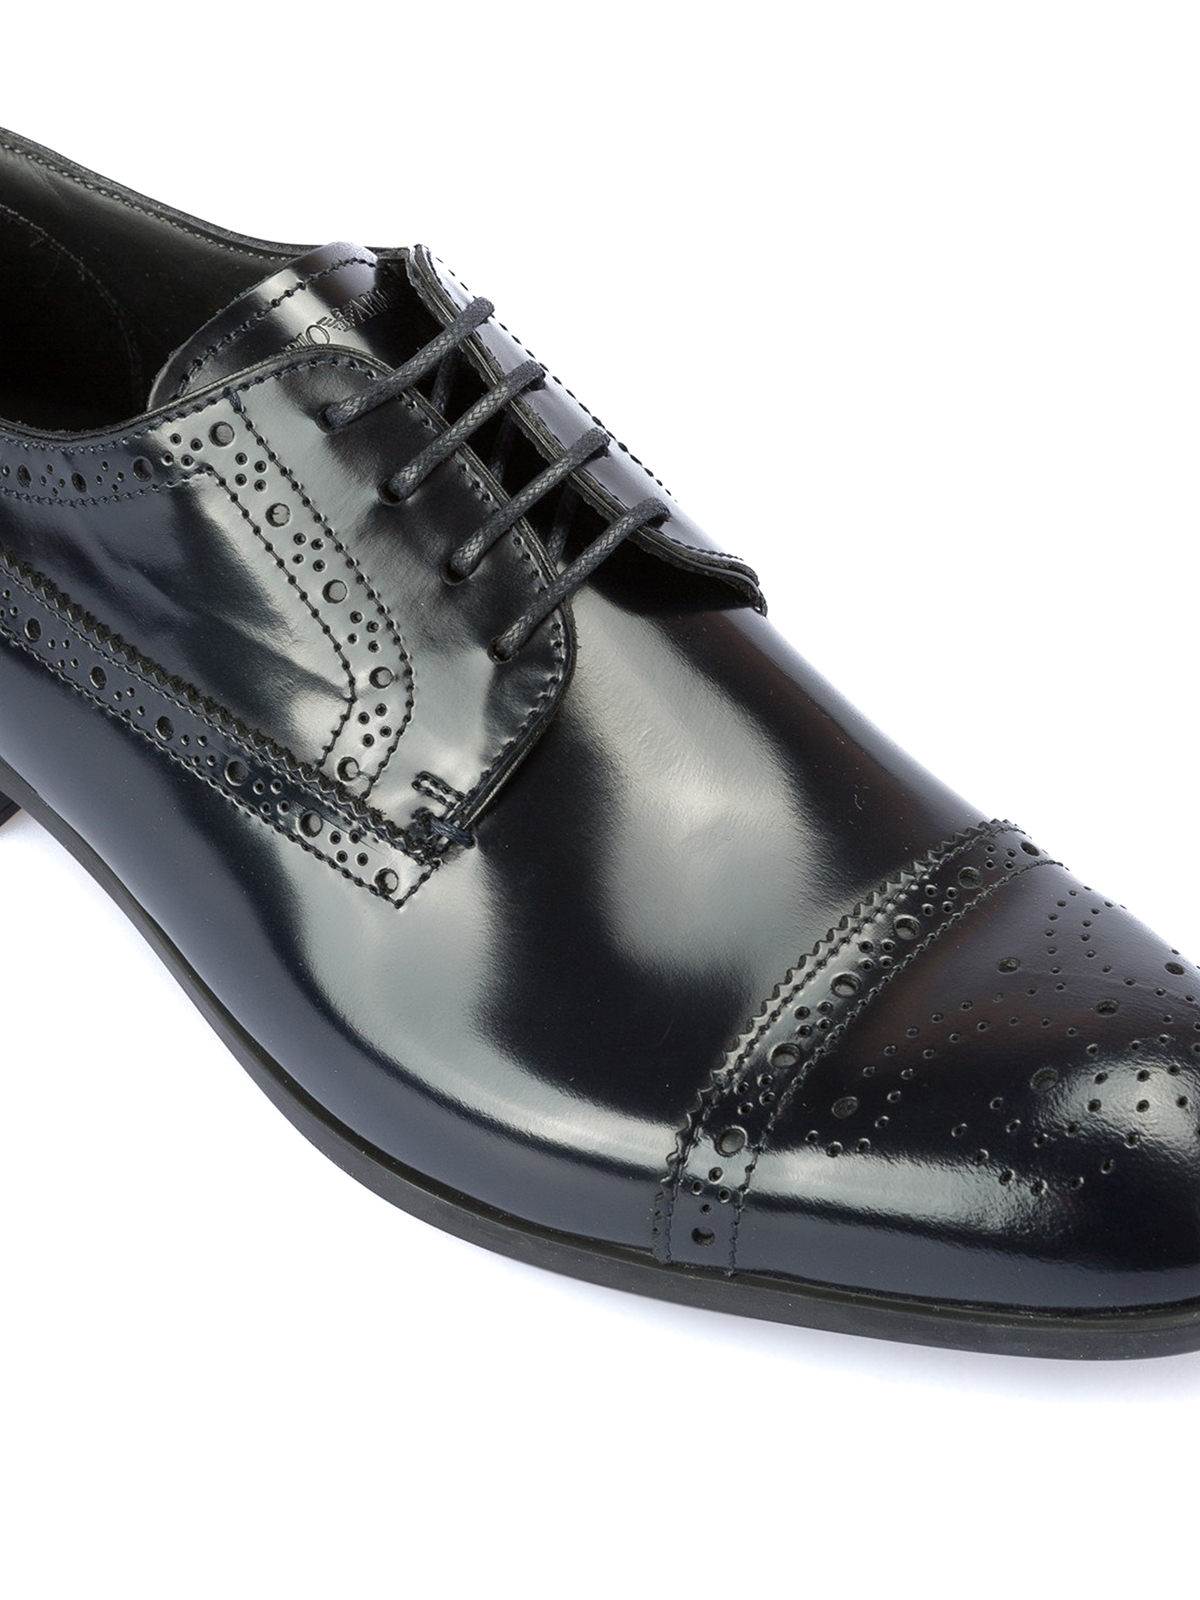 Classic shoes Emporio Armani - Polished leather Derby shoes -  X4C345XAT0400006